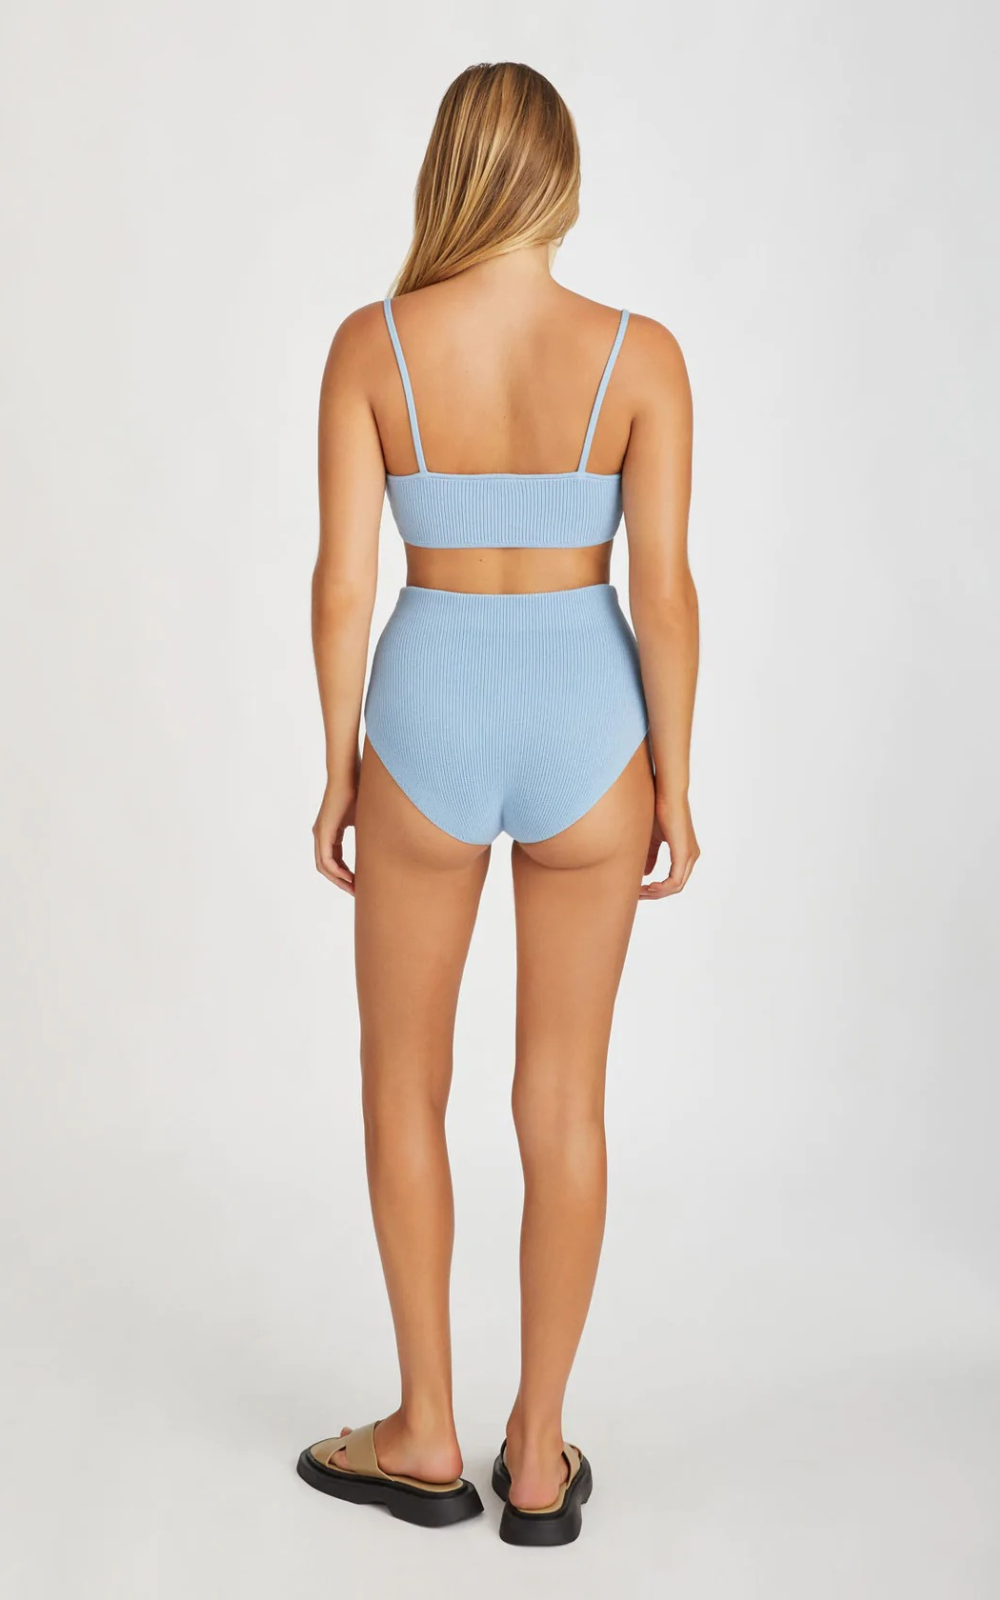 Knitted Bralette - Cool Blue